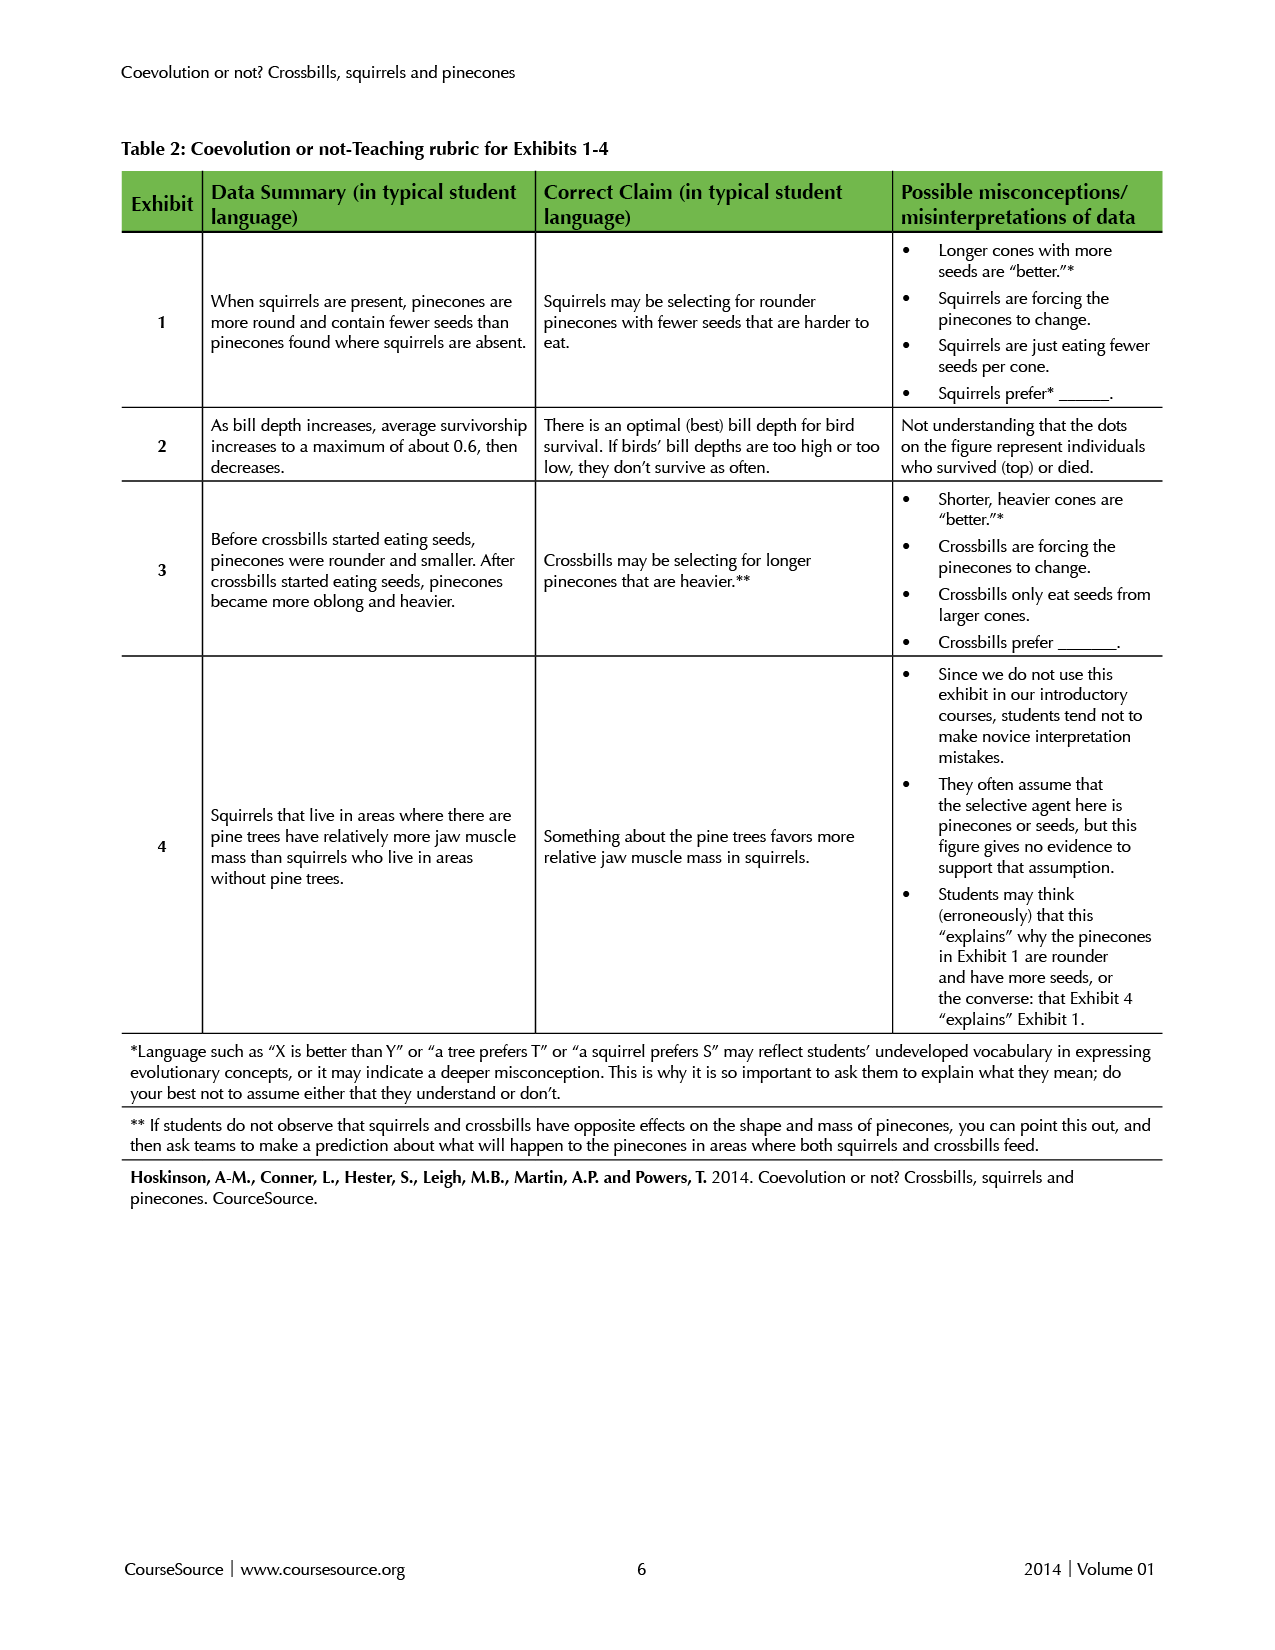 Table 2. Coevolution or not-Teaching rubric for exhibits 1-4